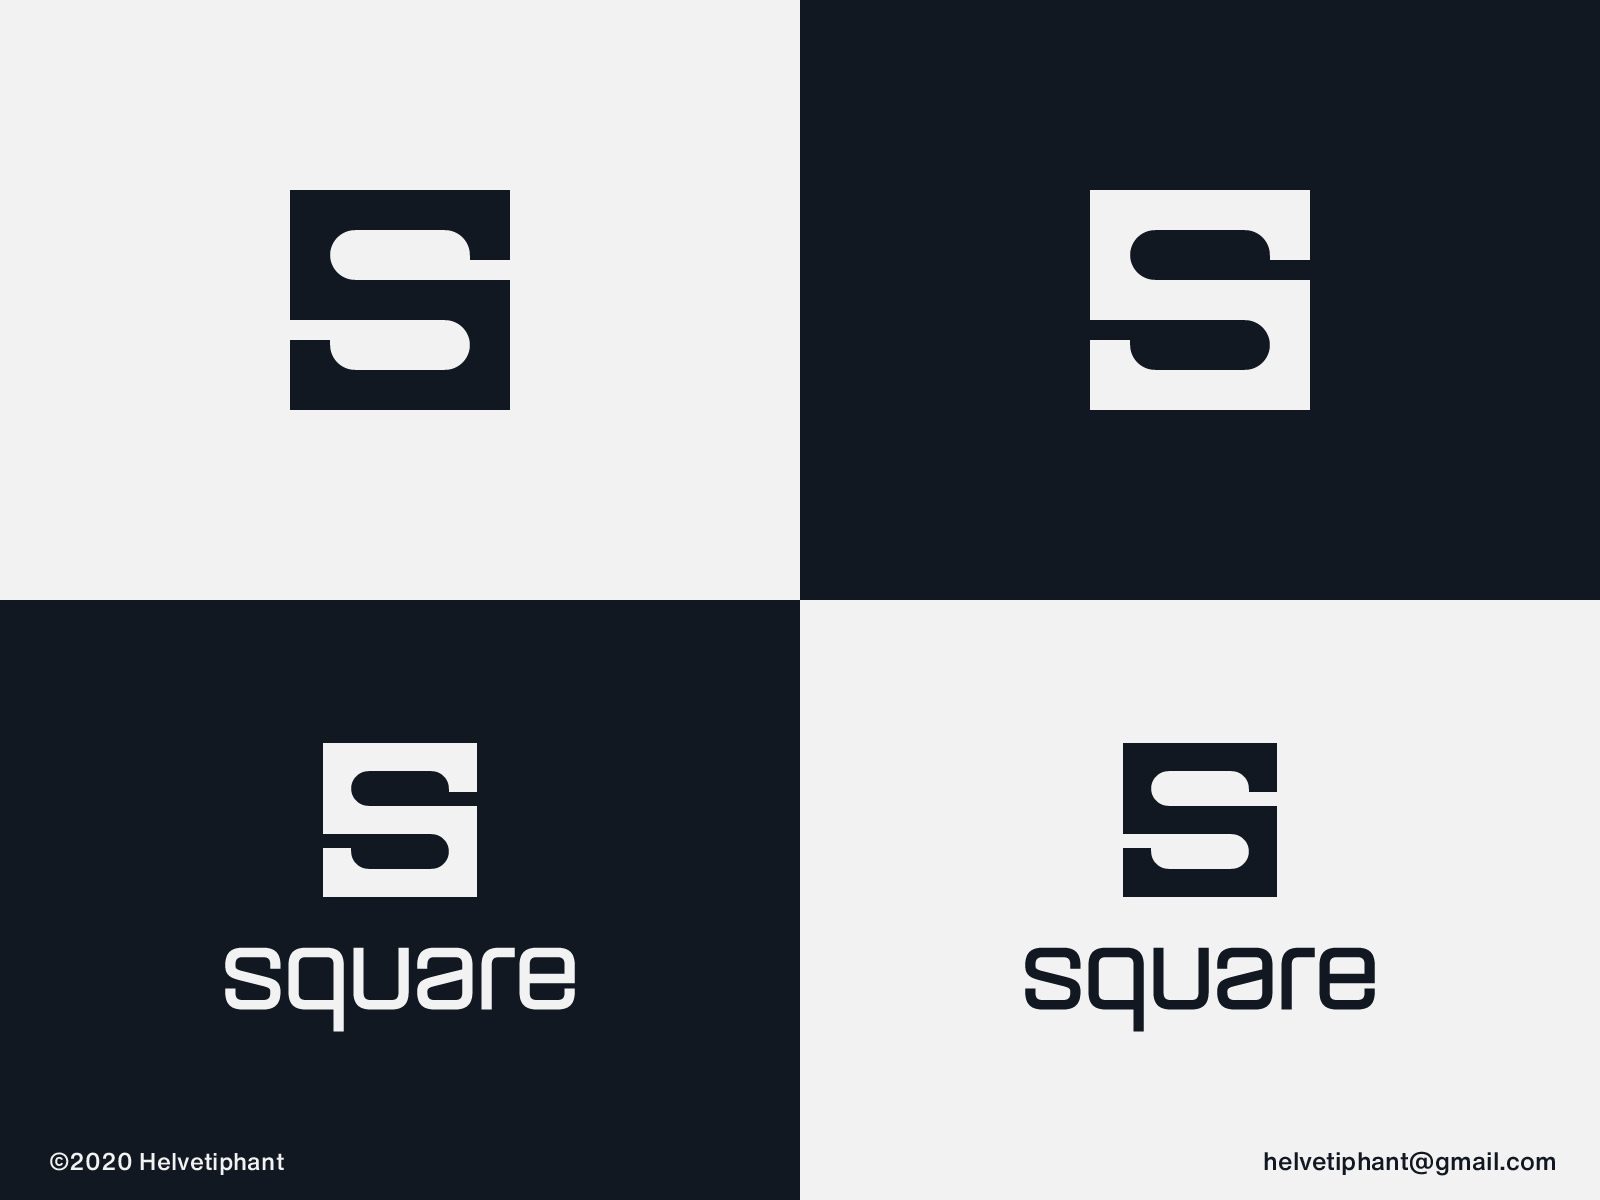 square - logo concept by Helvetiphant™ on Dribbble